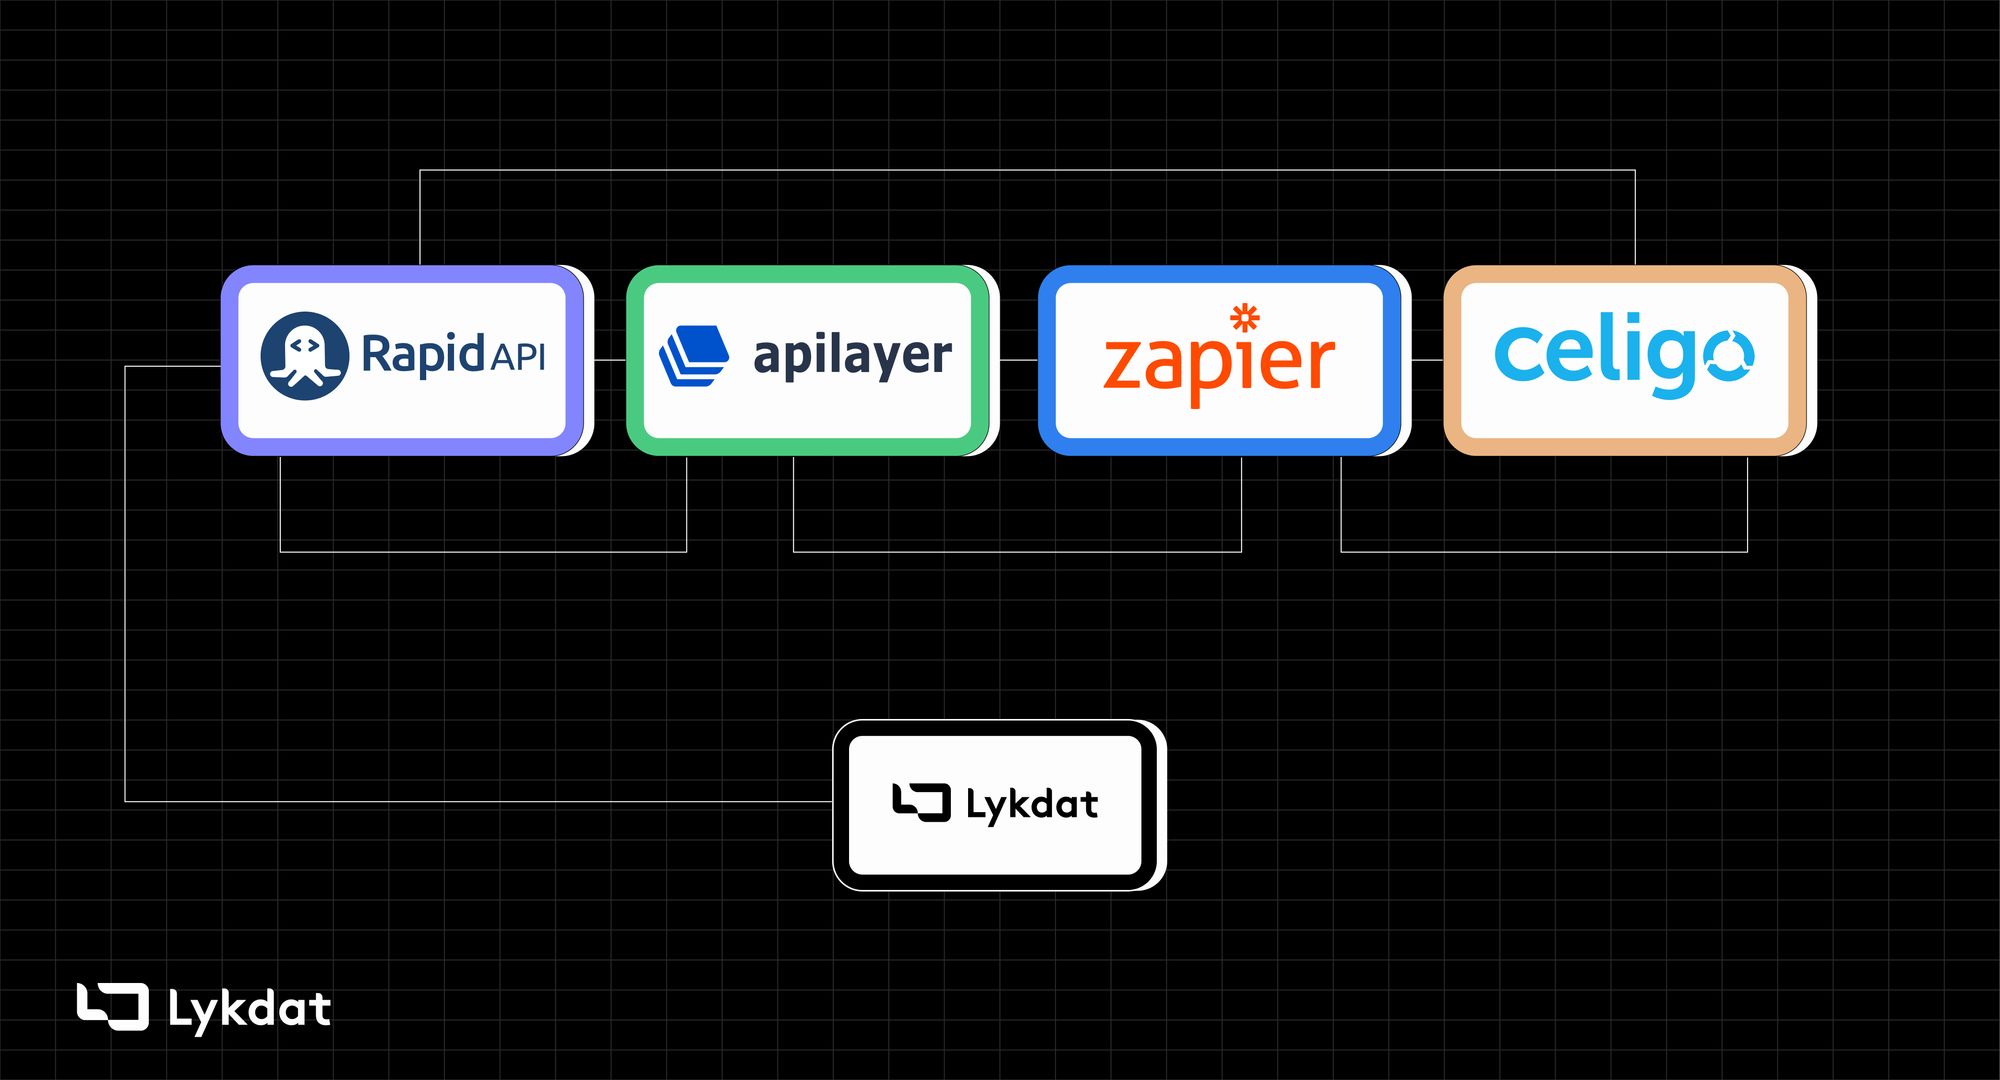 Exploring Lykdat Search with Rapid API